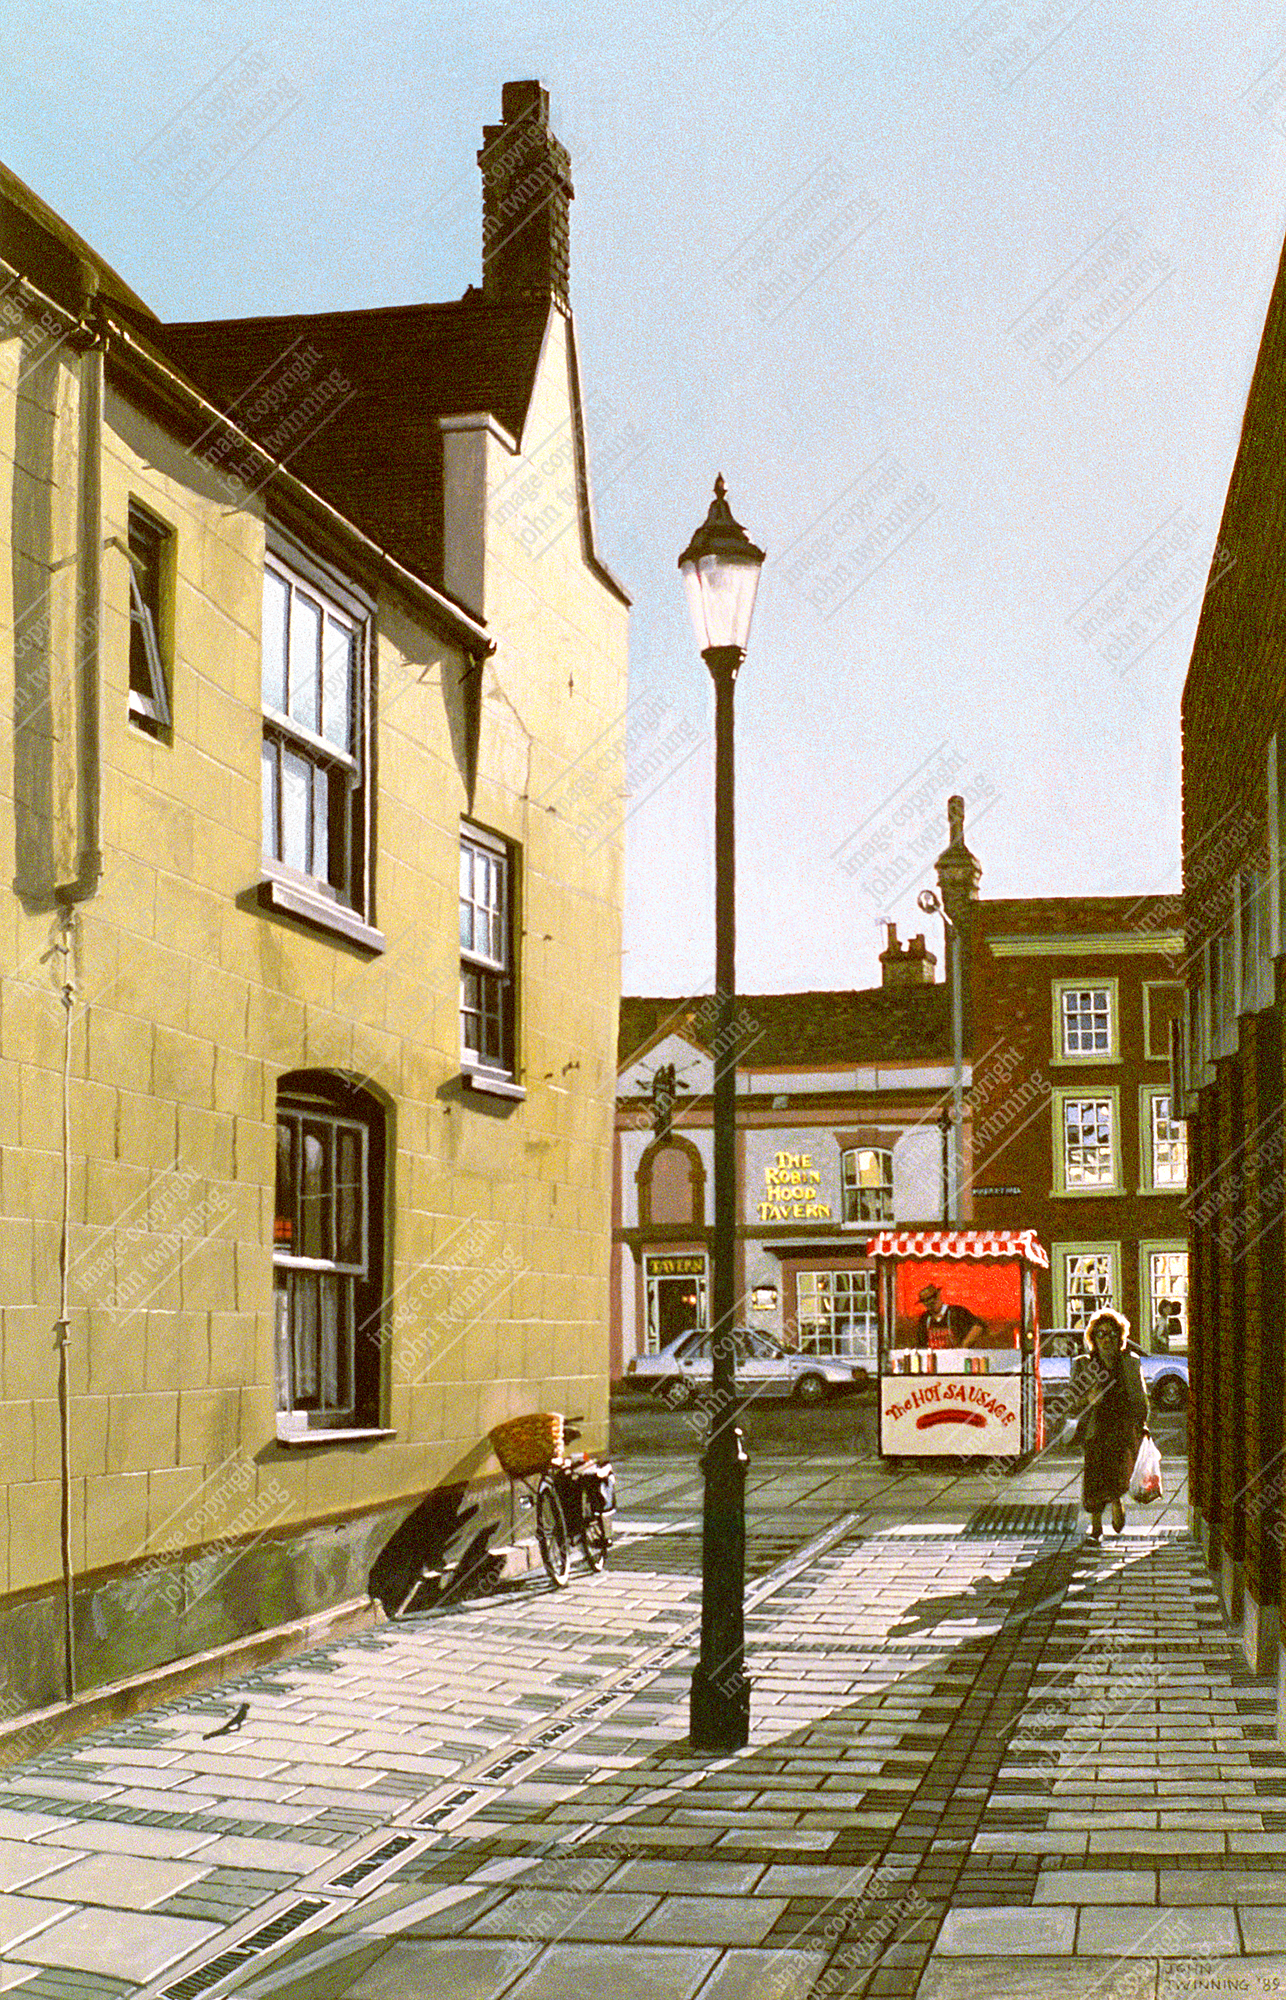 'Towards The Robin Hood Tavern, St. Ives' - art print from a townscape painting of this cambridgshire town's market area